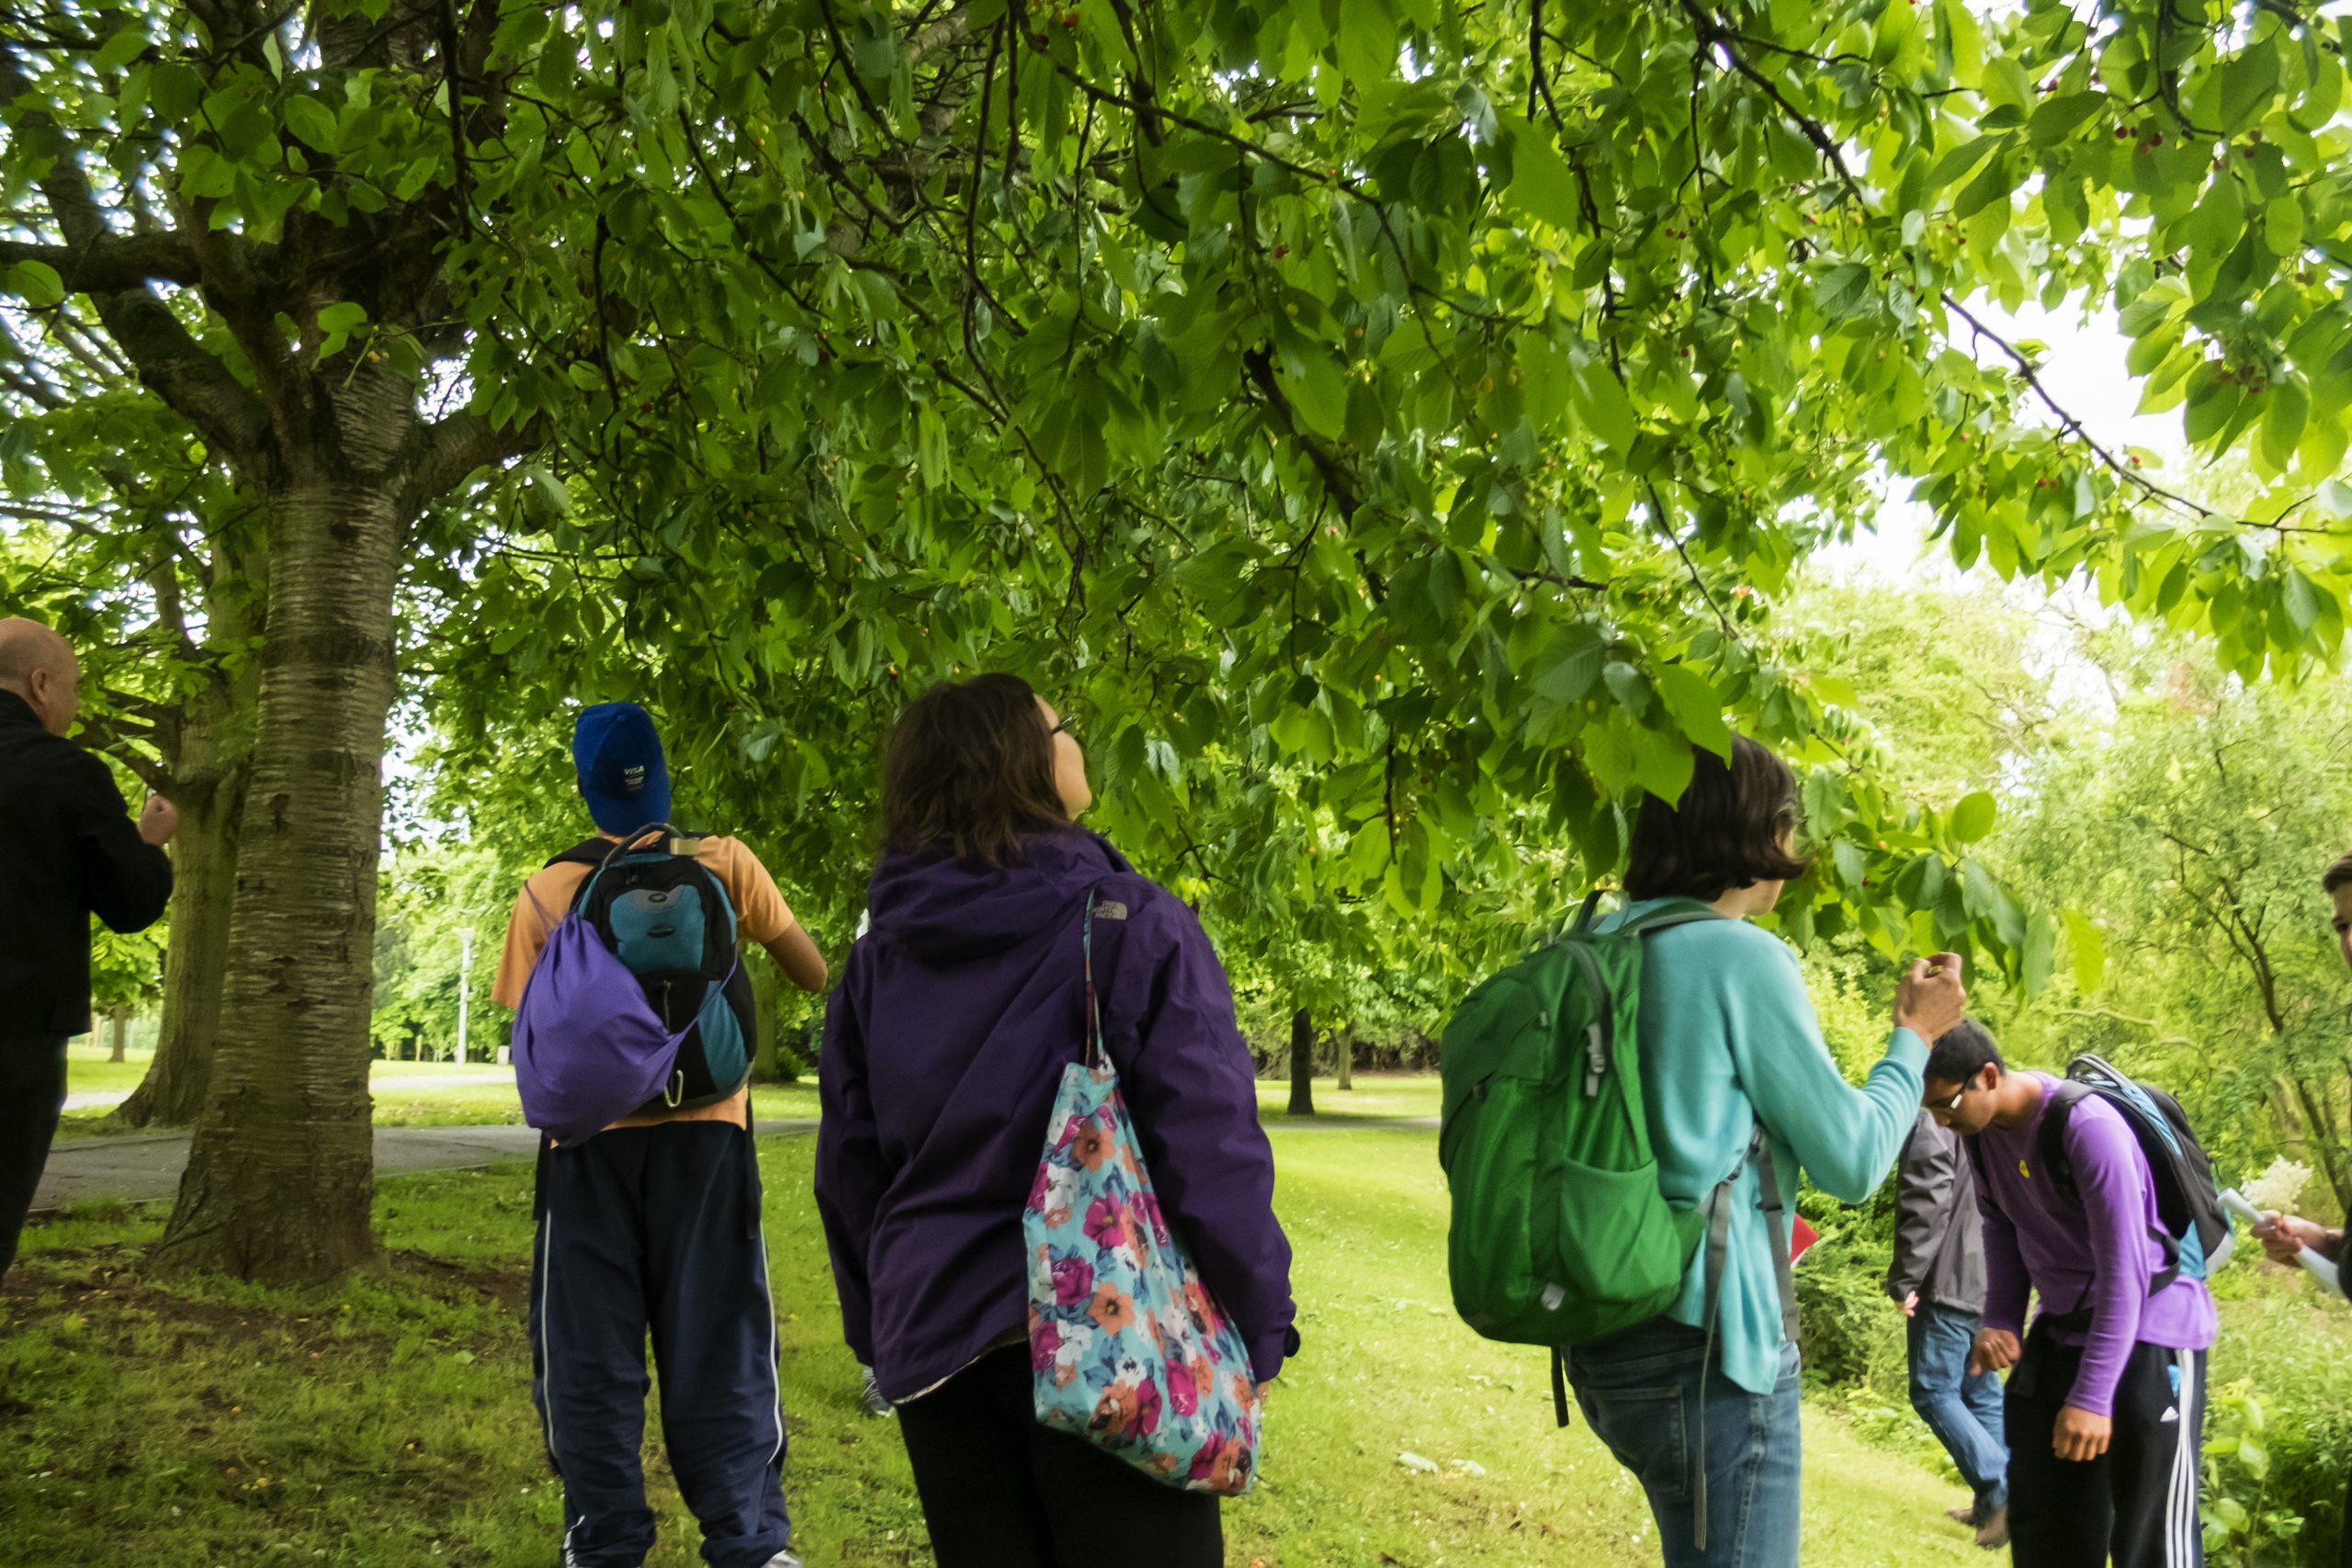 A group of people walking under several low hanging tree branches.